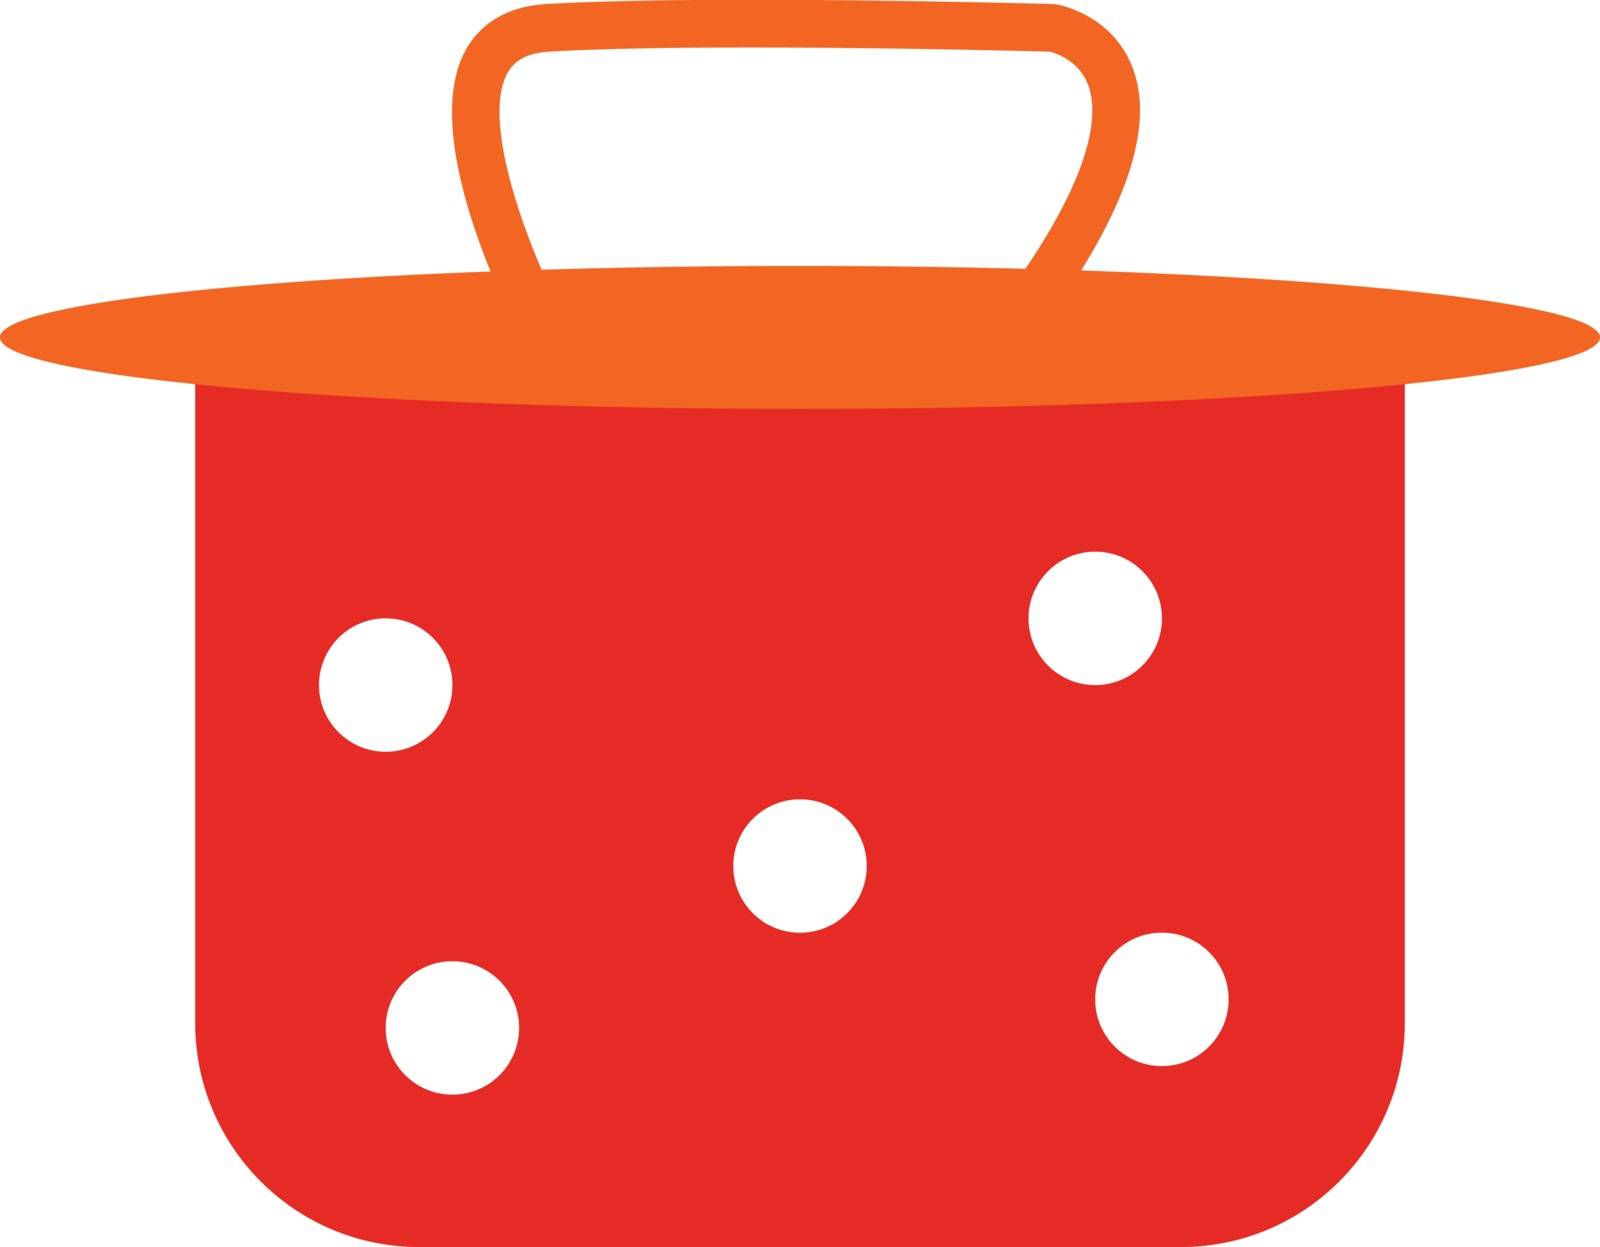 A red vessel closed on top with an orange lid vector color drawing or illustration